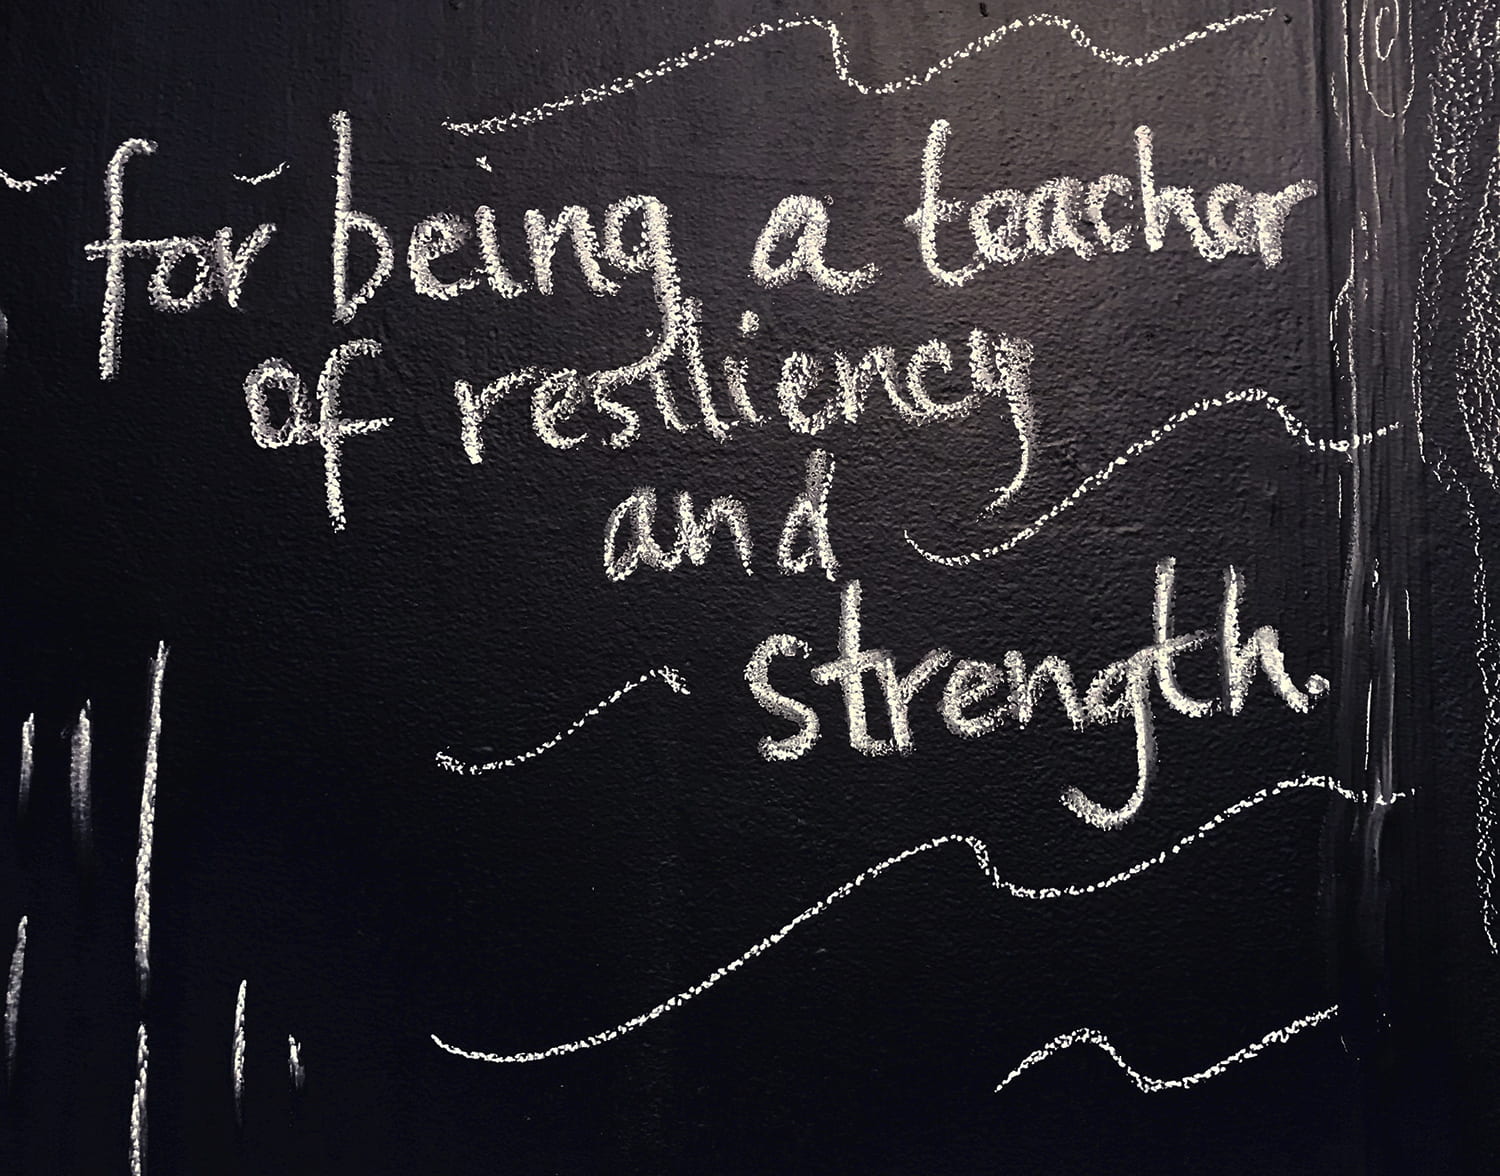 handwritten words on a chalkboard: "for being a teacher of resiliency and strength."